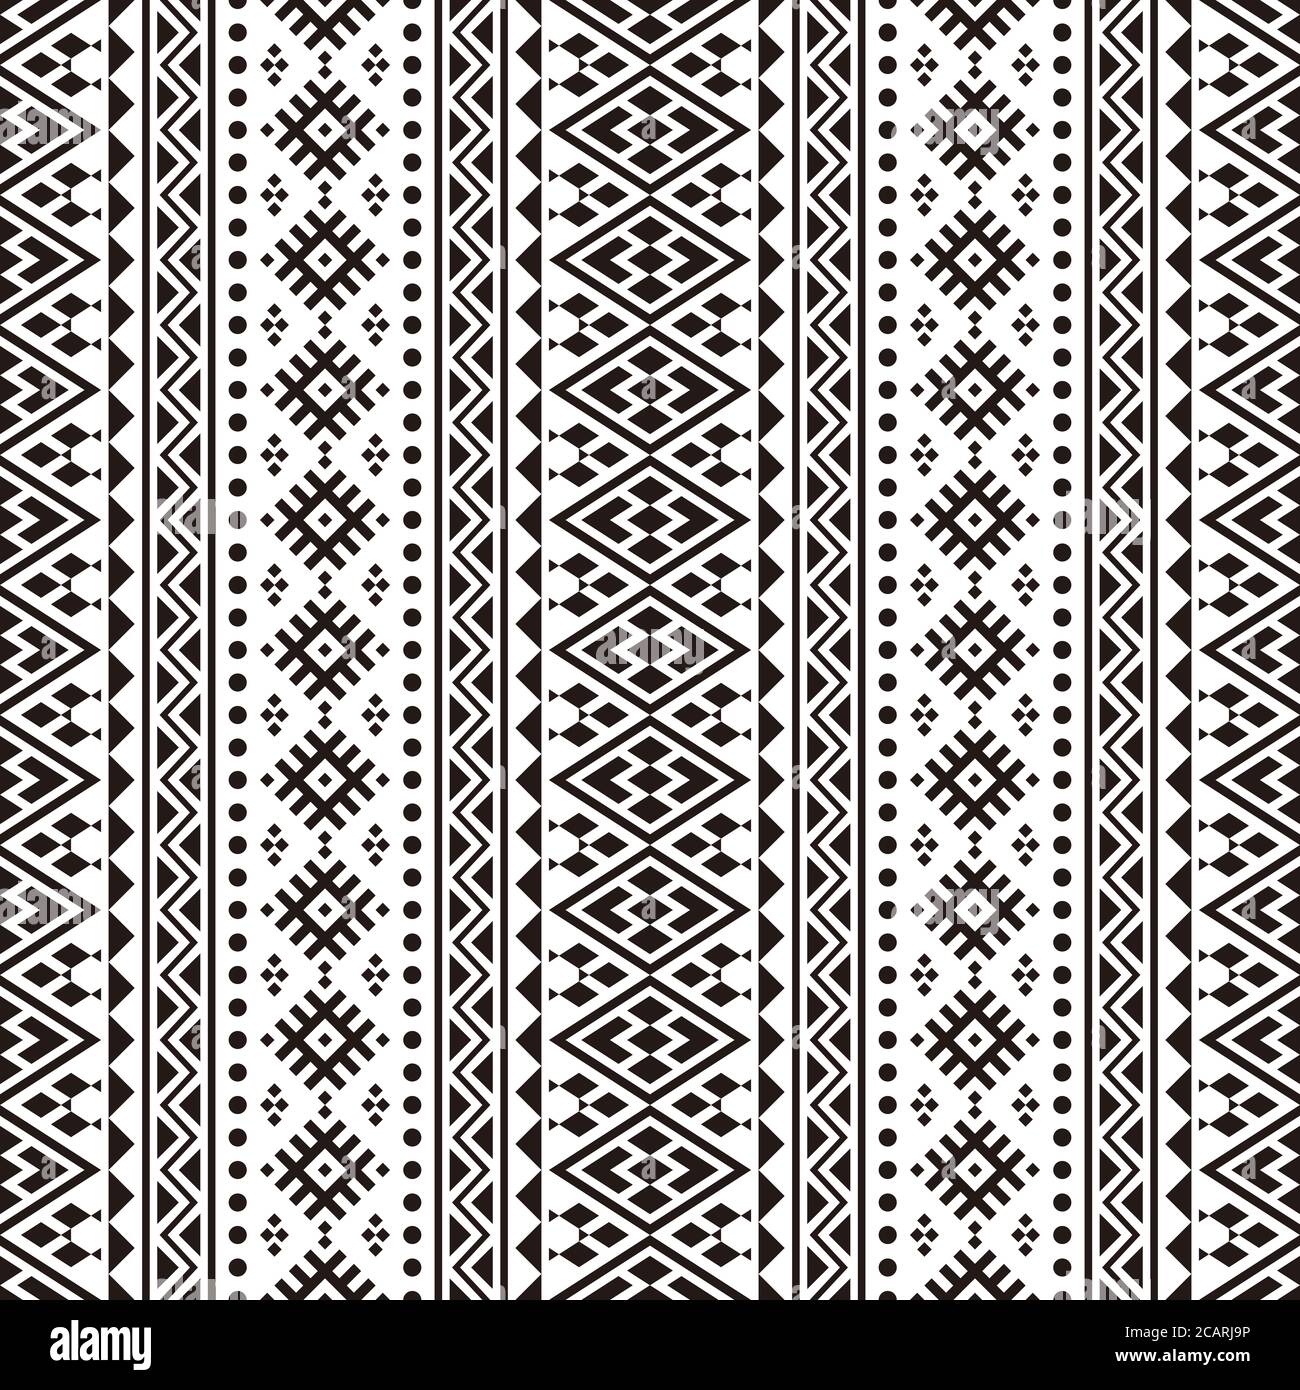 Traditional motif seamless ethnic pattern texture background design ...